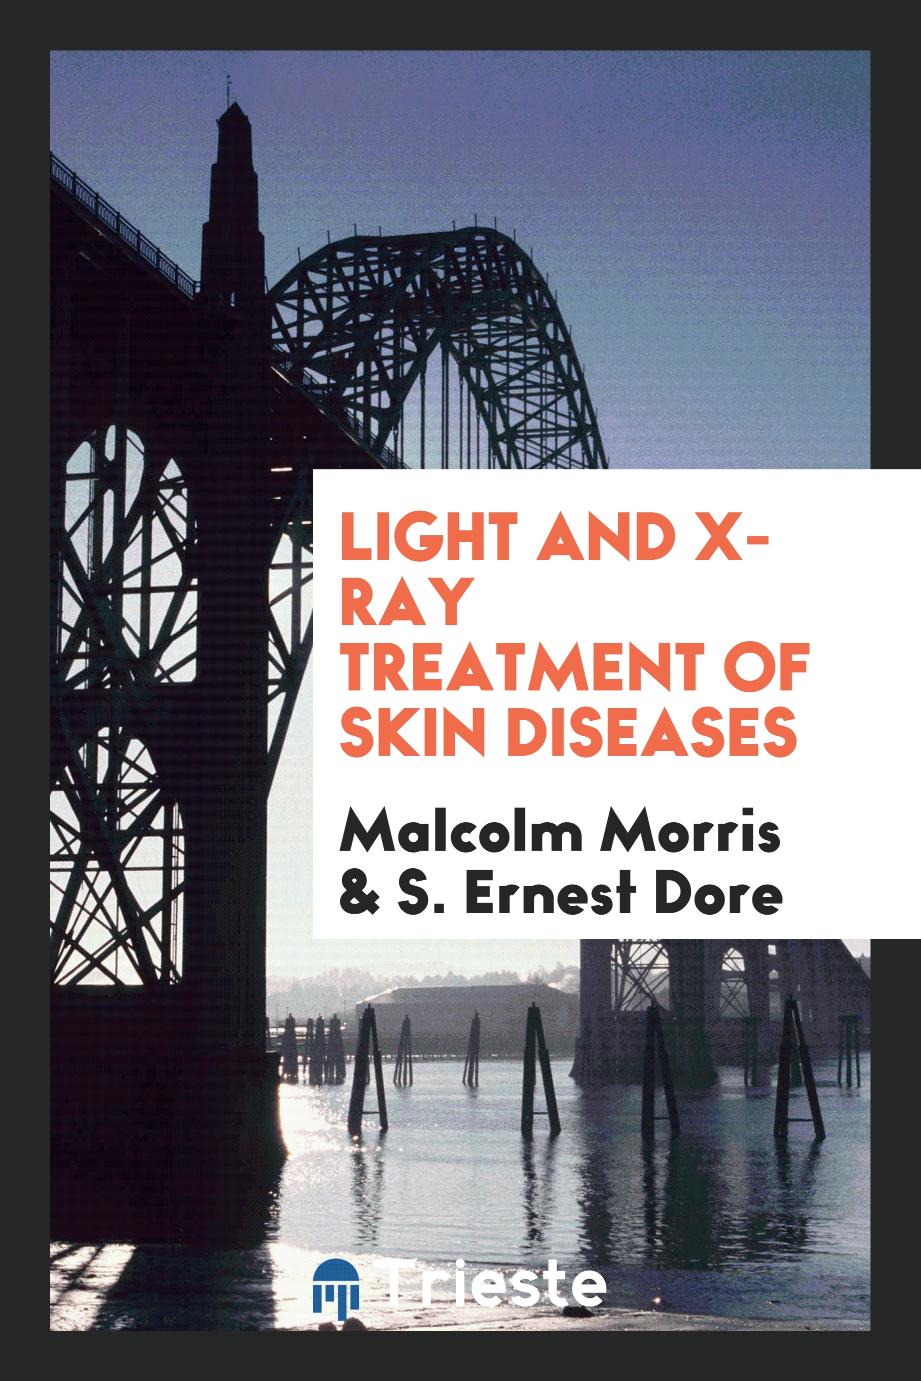 Light and x-ray treatment of skin diseases